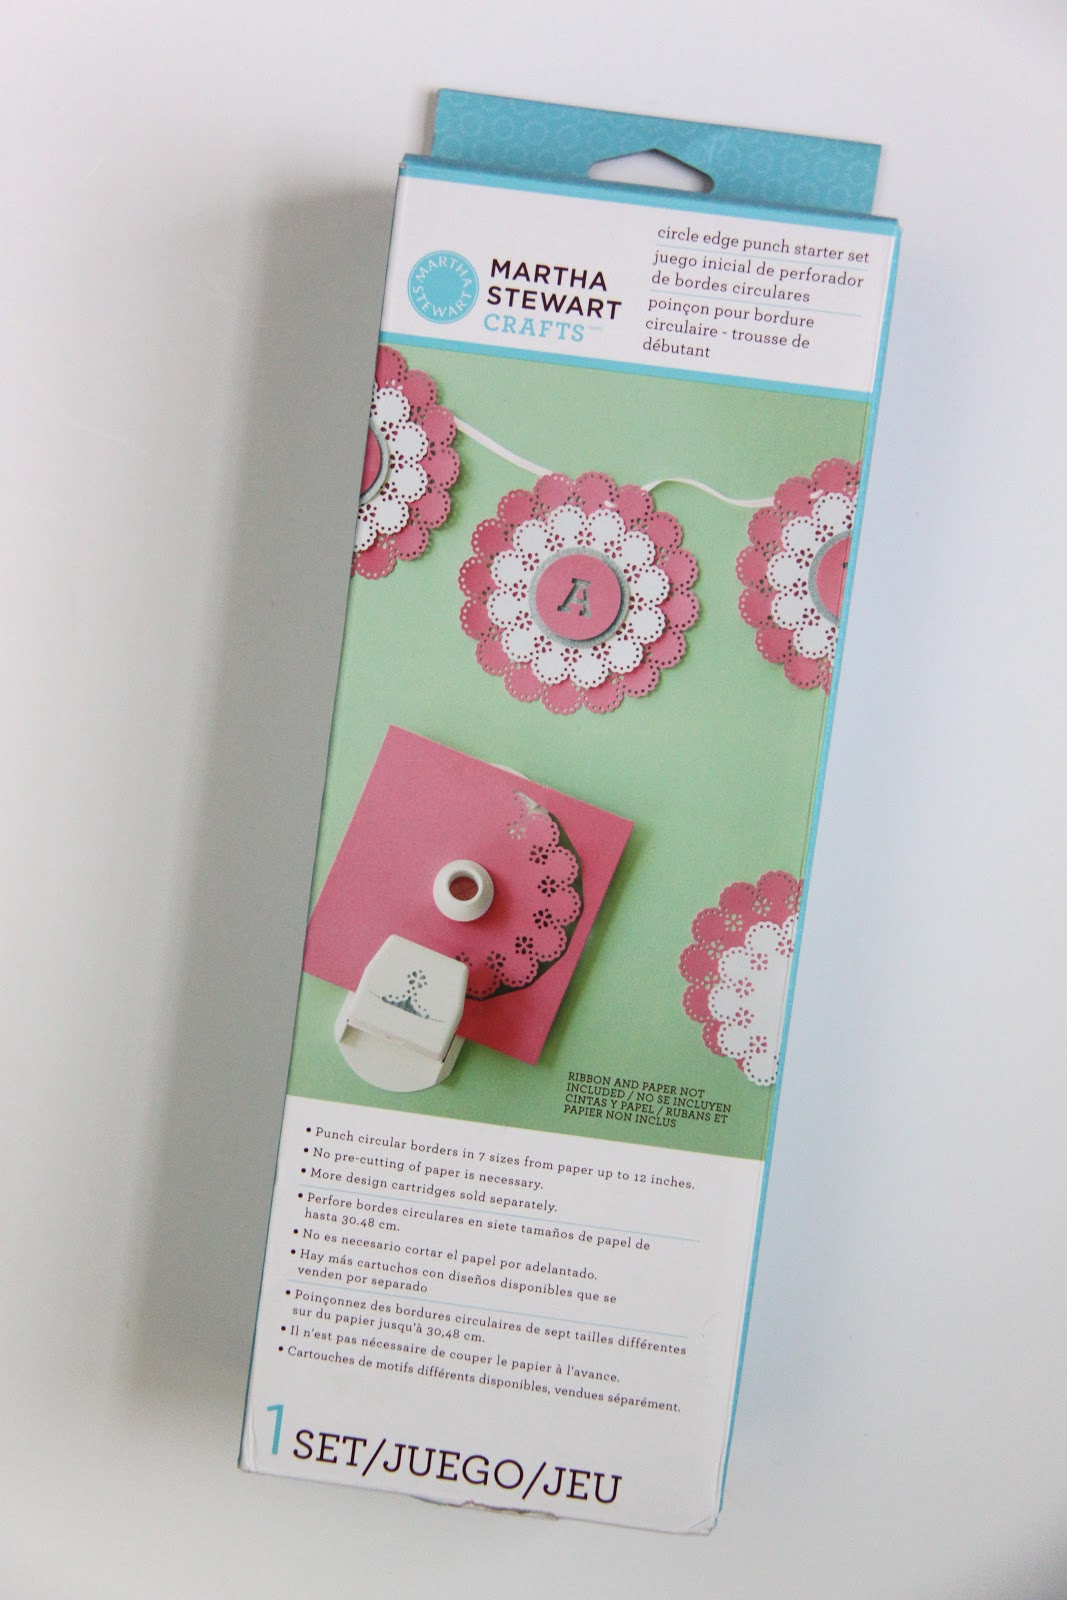 Aesthetic Nest: Review: Martha Stewart Crafts Circle Edge Punch